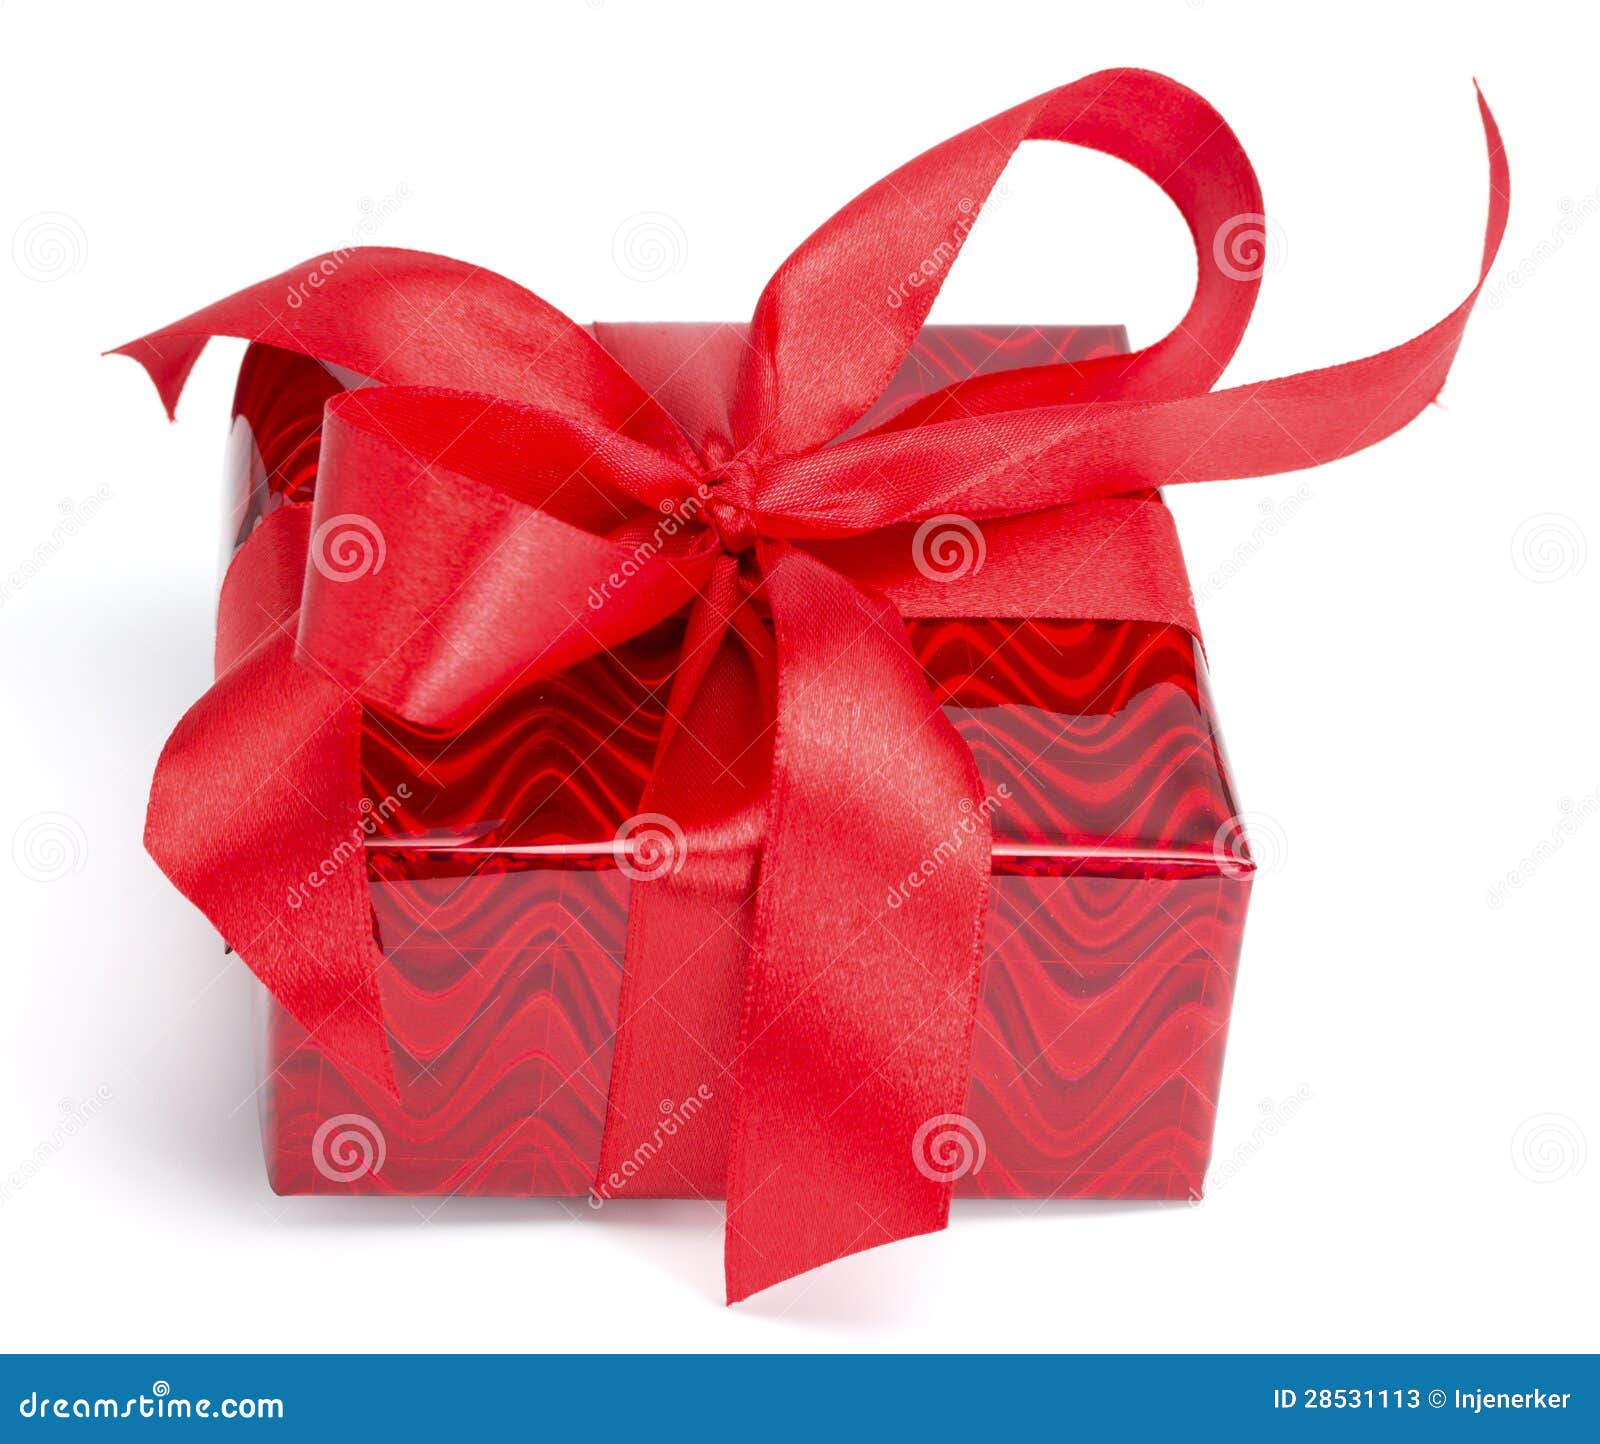 Red gift tied up by a bow stock image. Image of occasion - 28531113